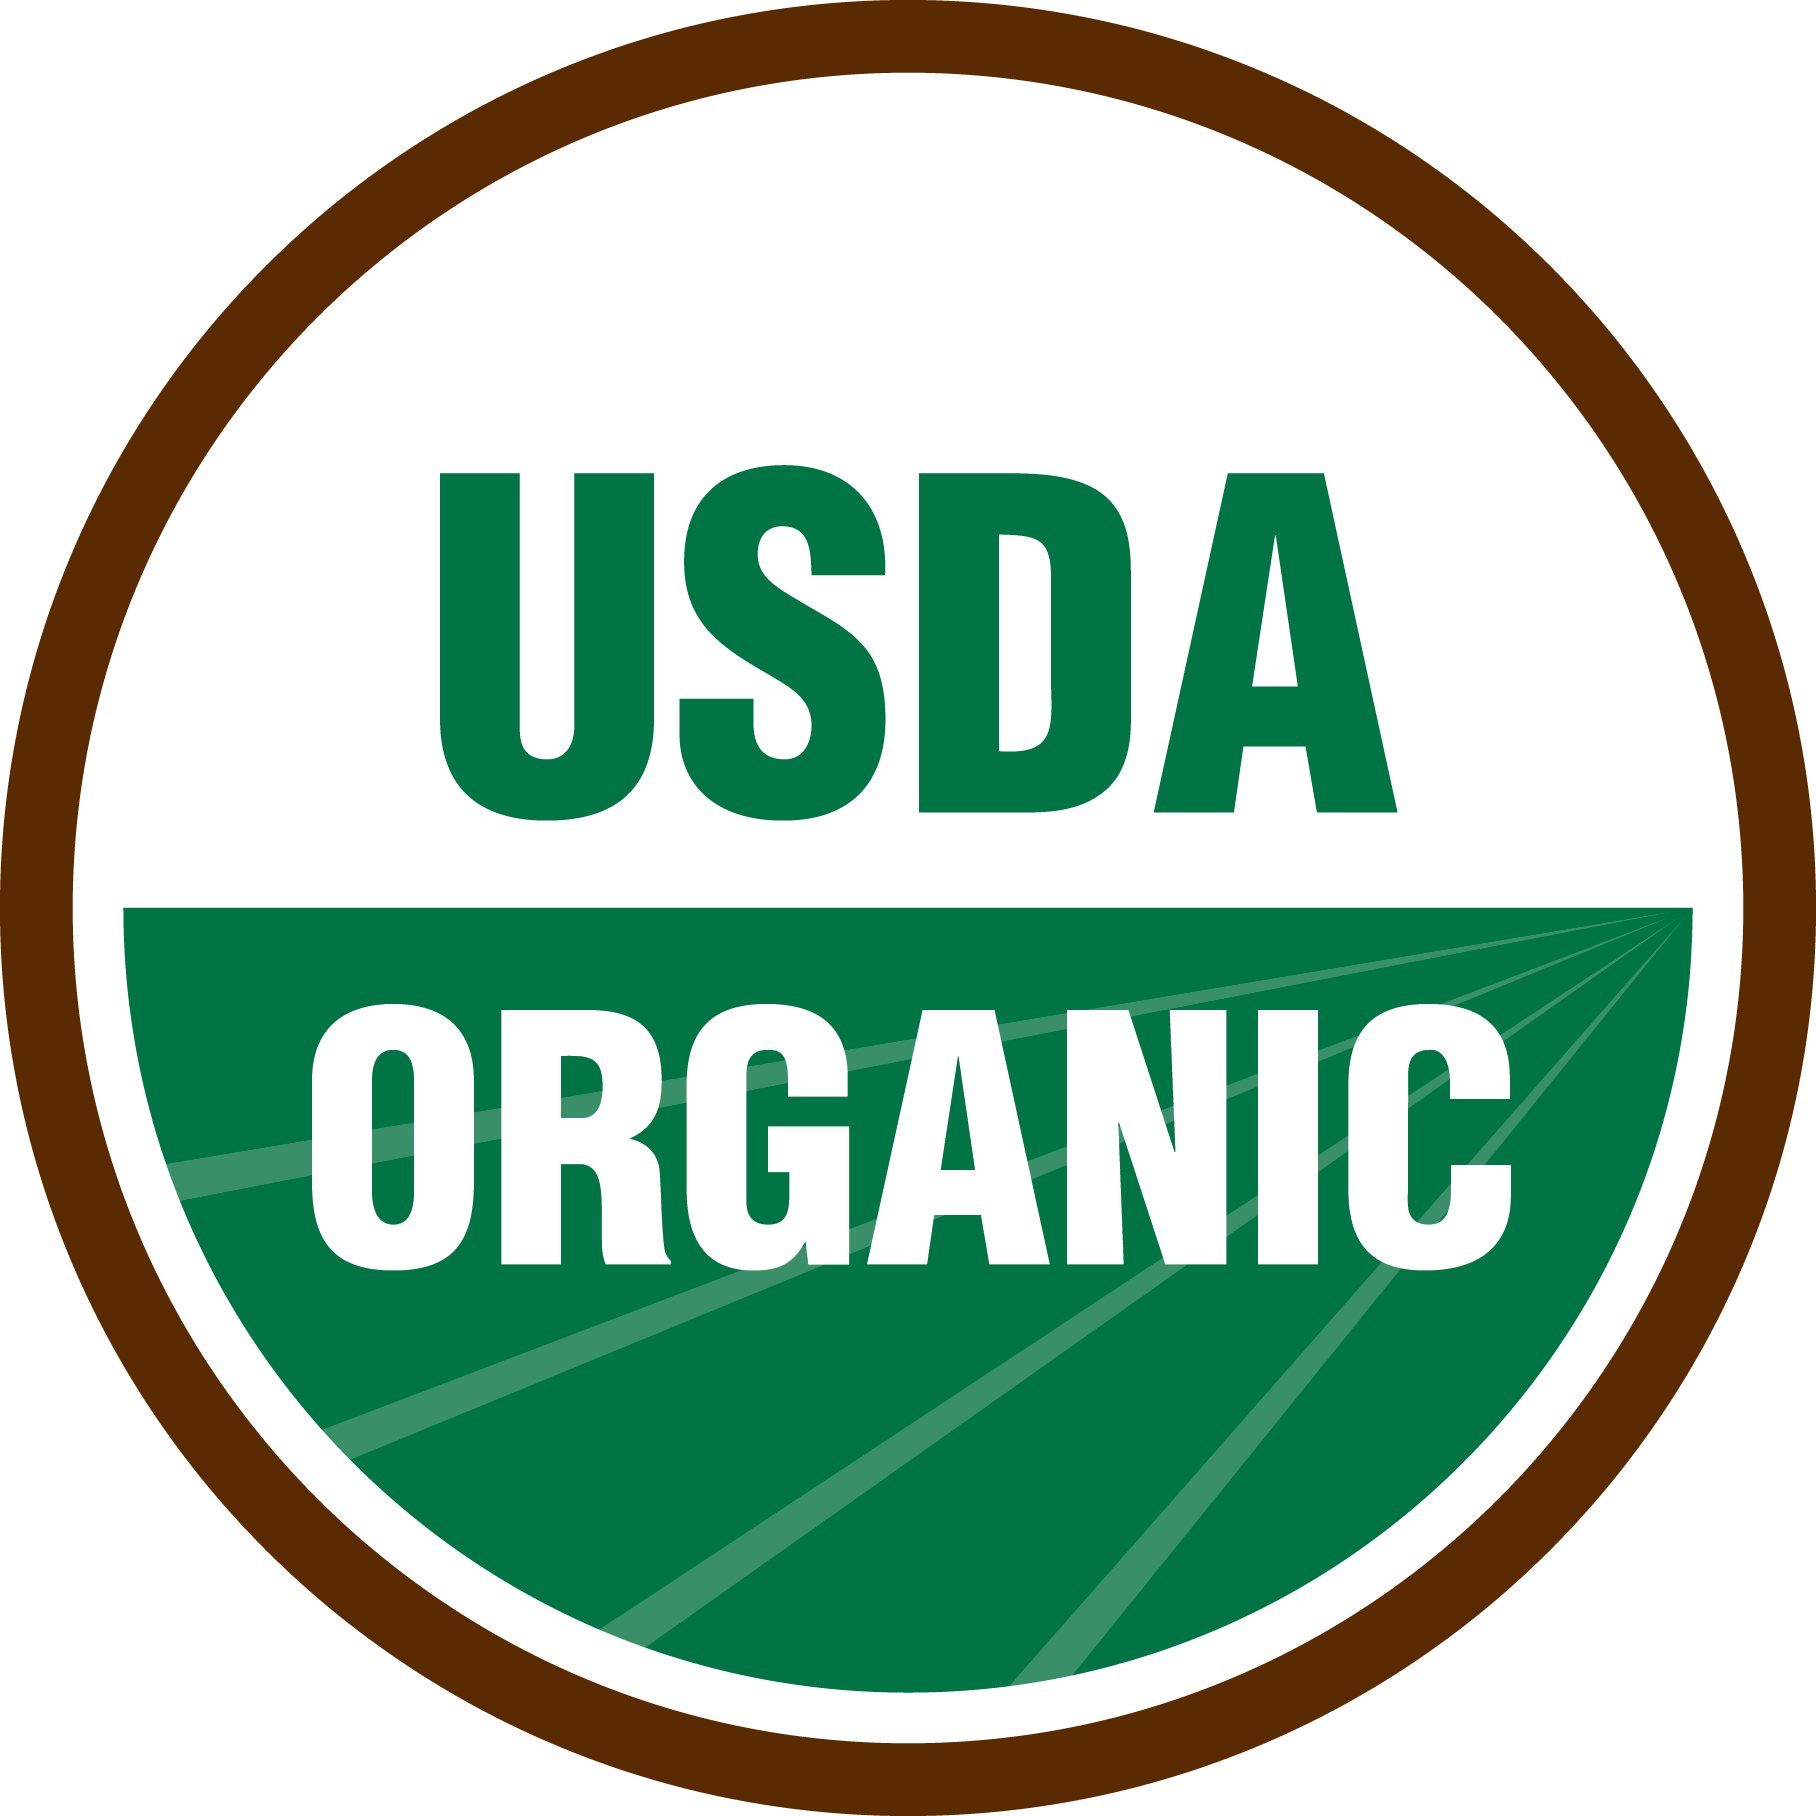 The Organic Seal | Agricultural Marketing Service